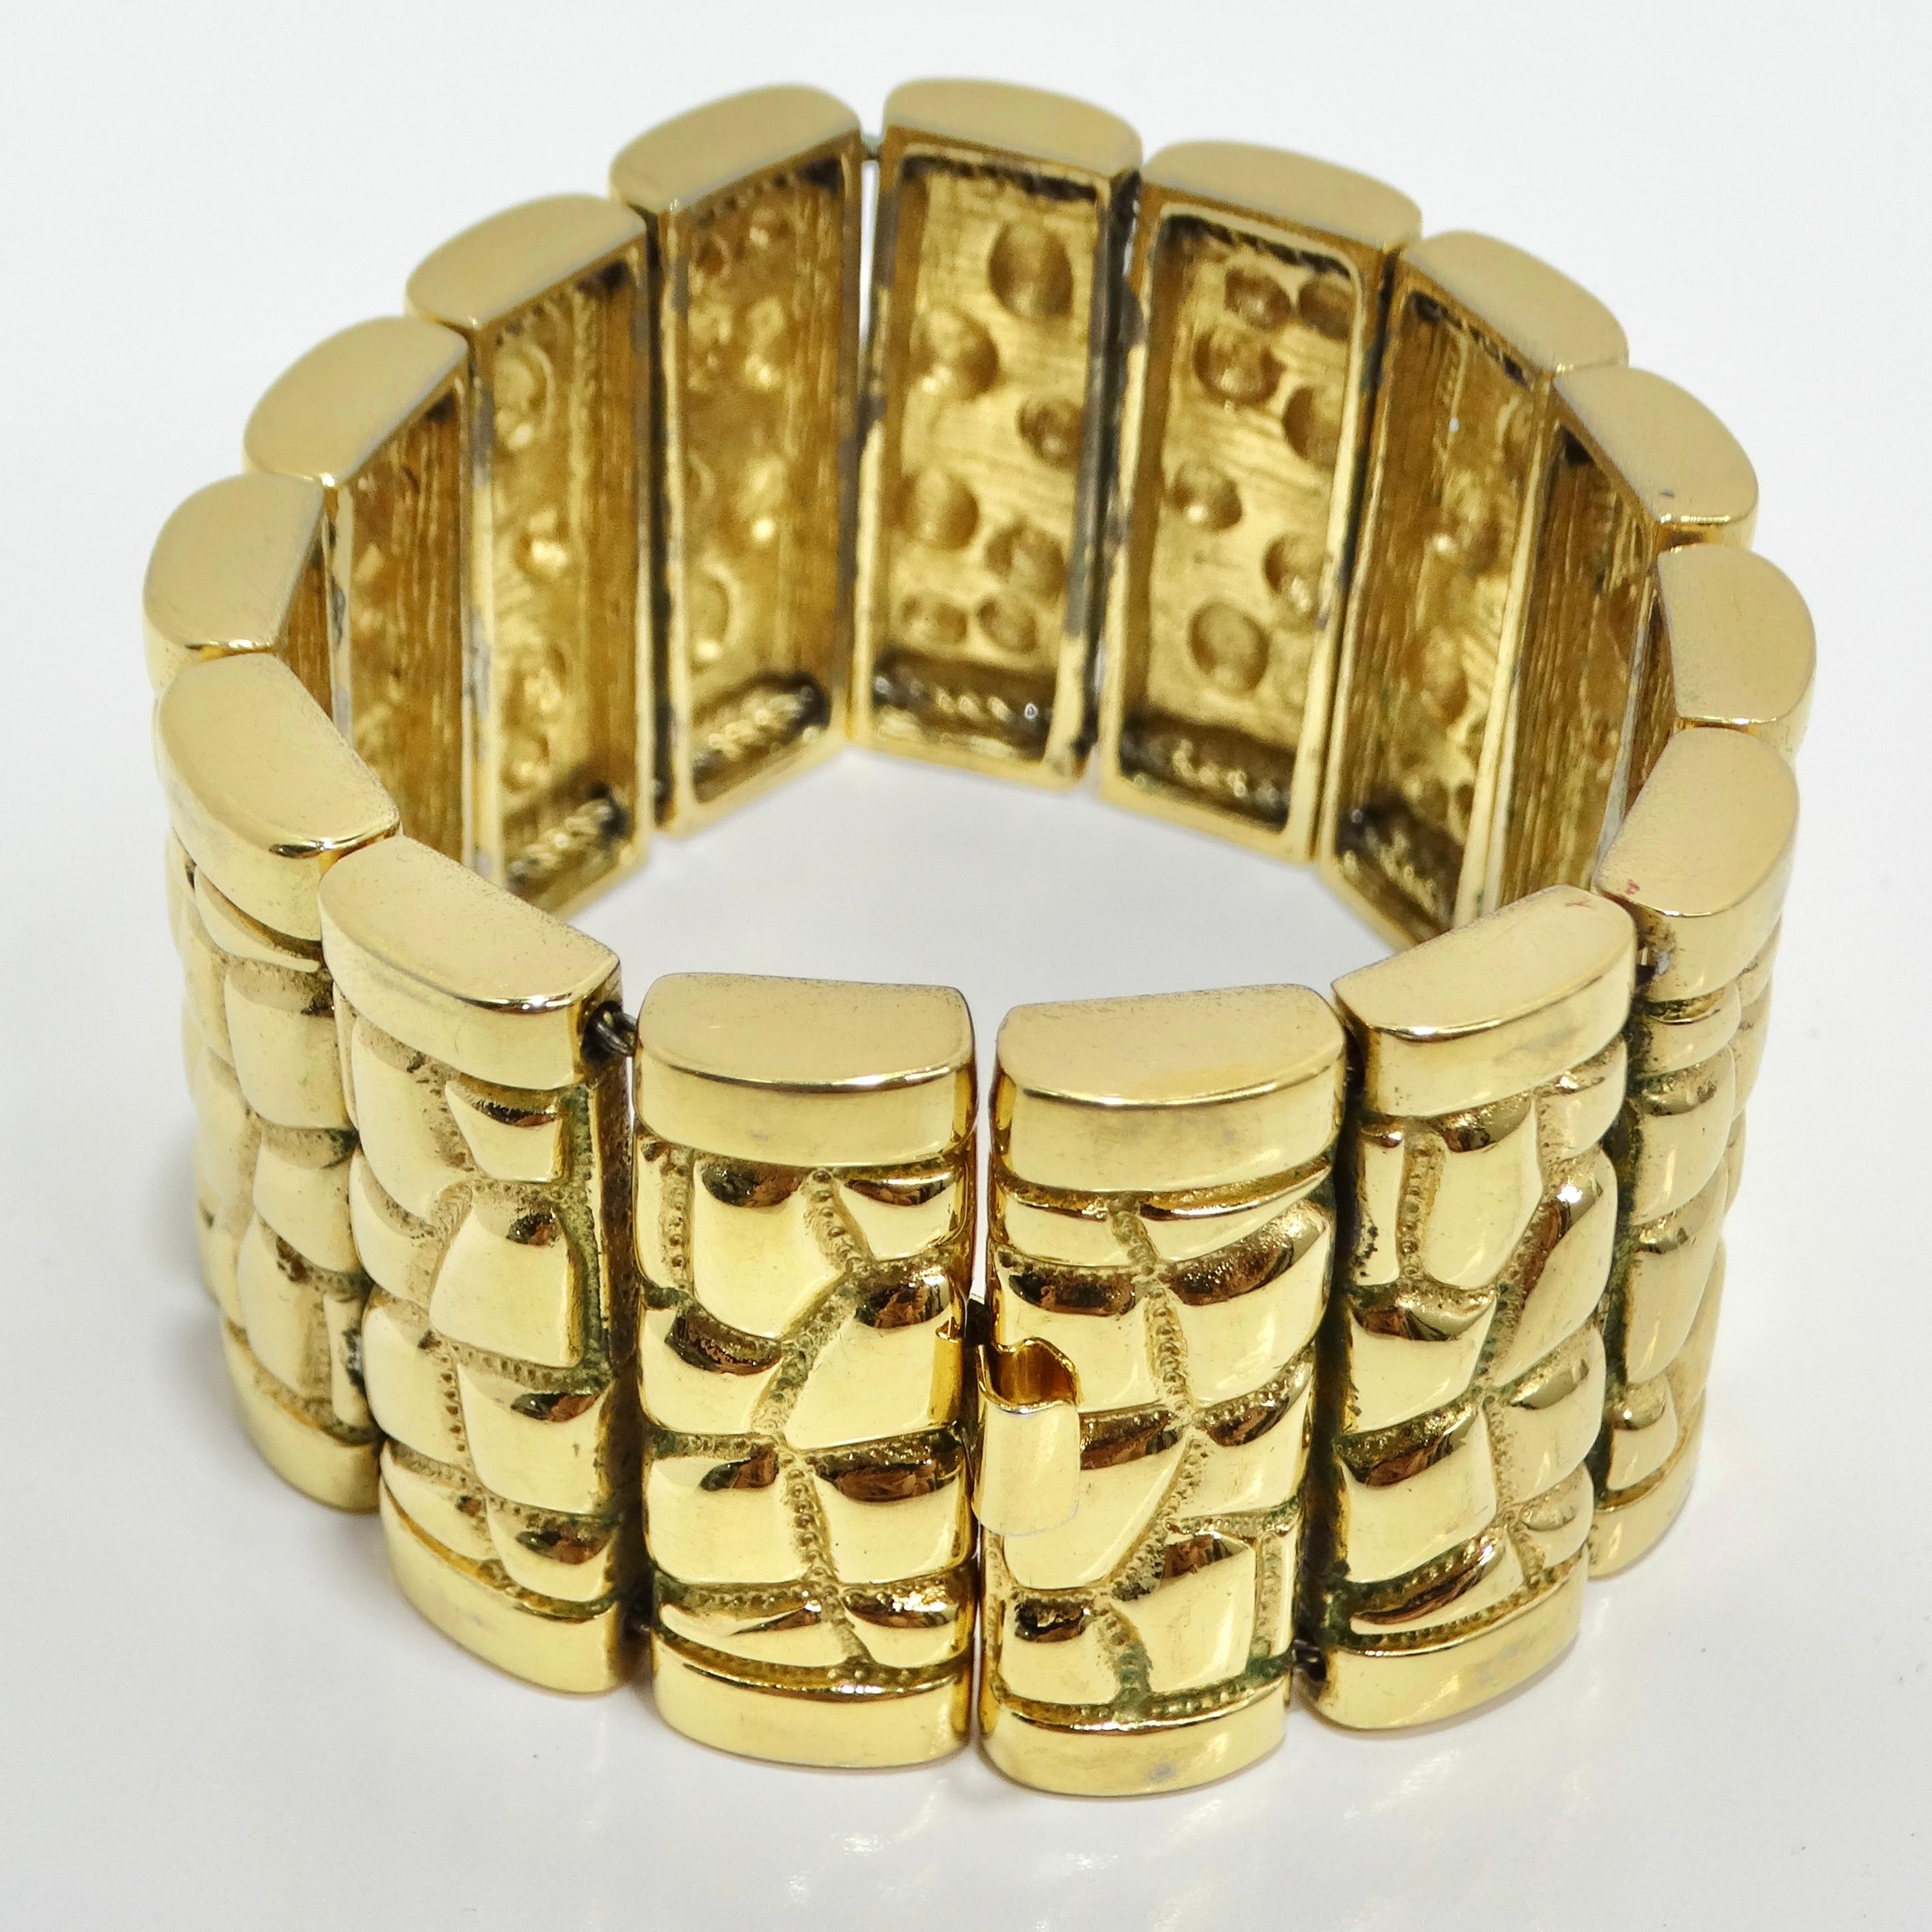 18K Gold Plated 1980s Bracelet In Excellent Condition For Sale In Scottsdale, AZ